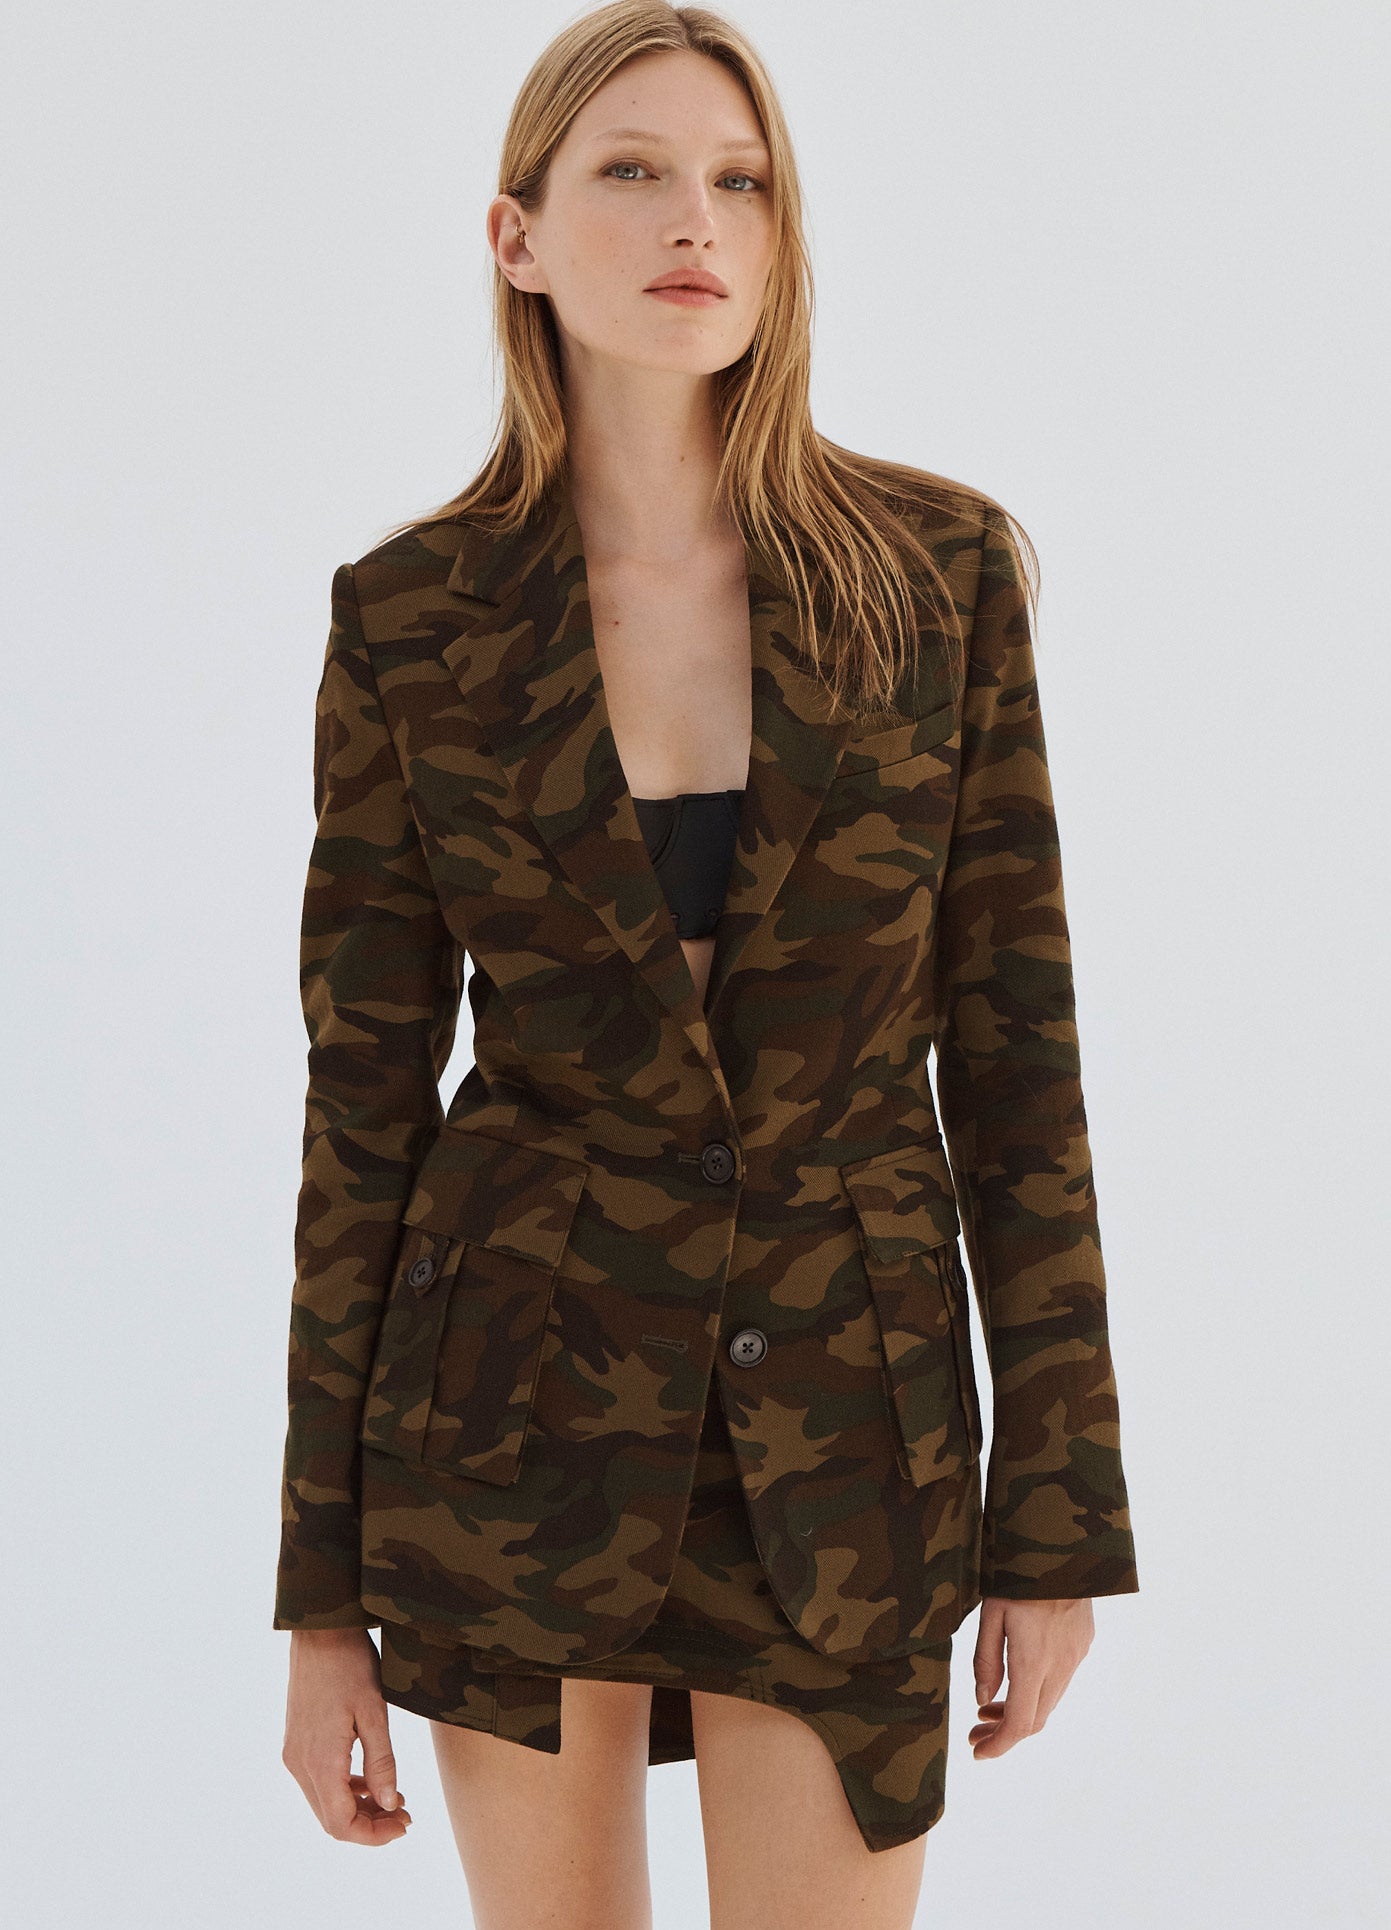 Camo Back Cut Out Jacket in Camo